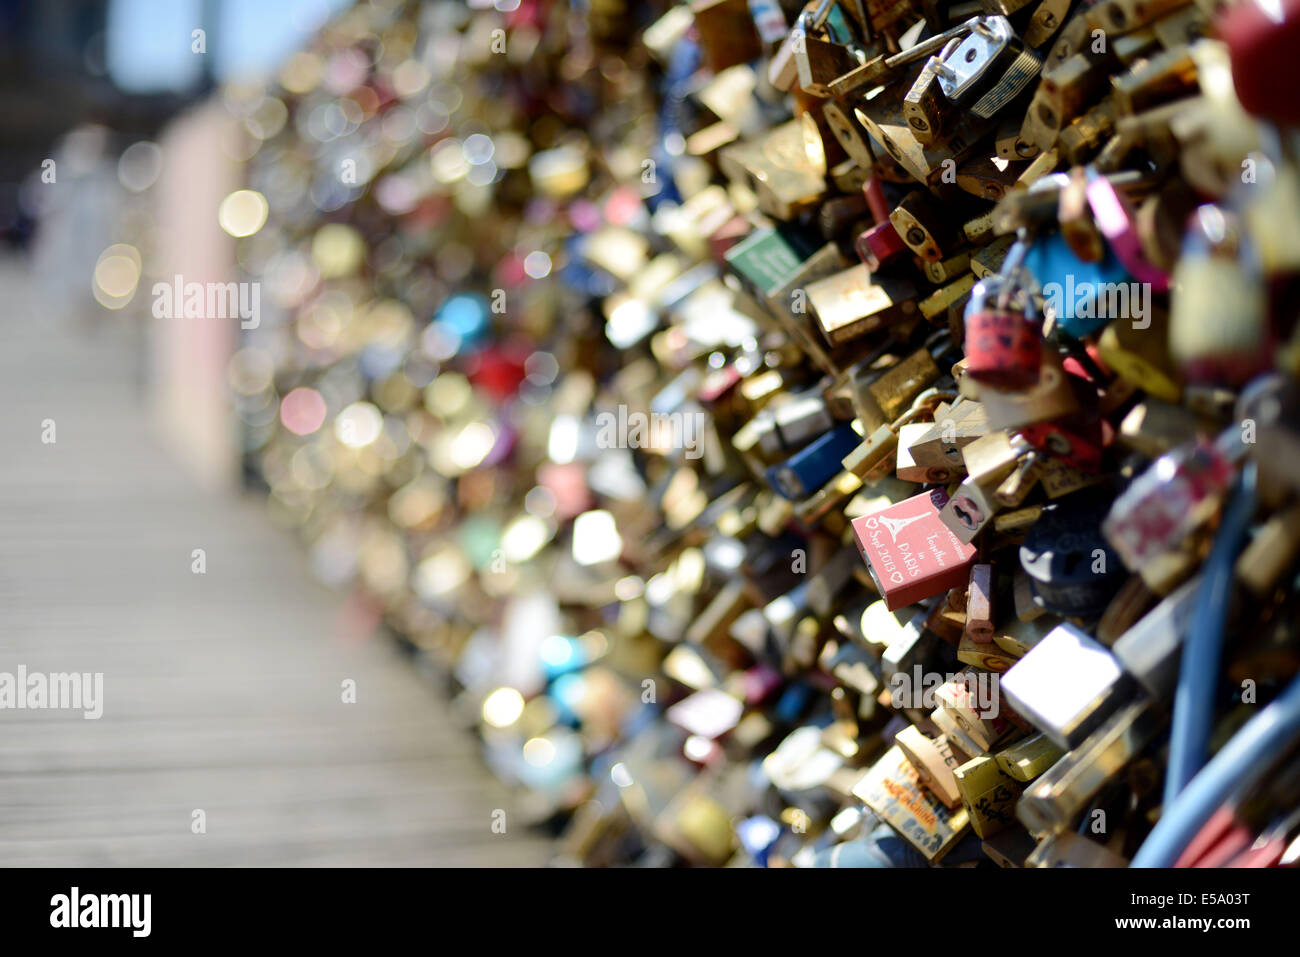 Padlocks on the fence of Paris' famous Pont des Arts in France, where romantic couples attach locks to proclaim their love. Stock Photo